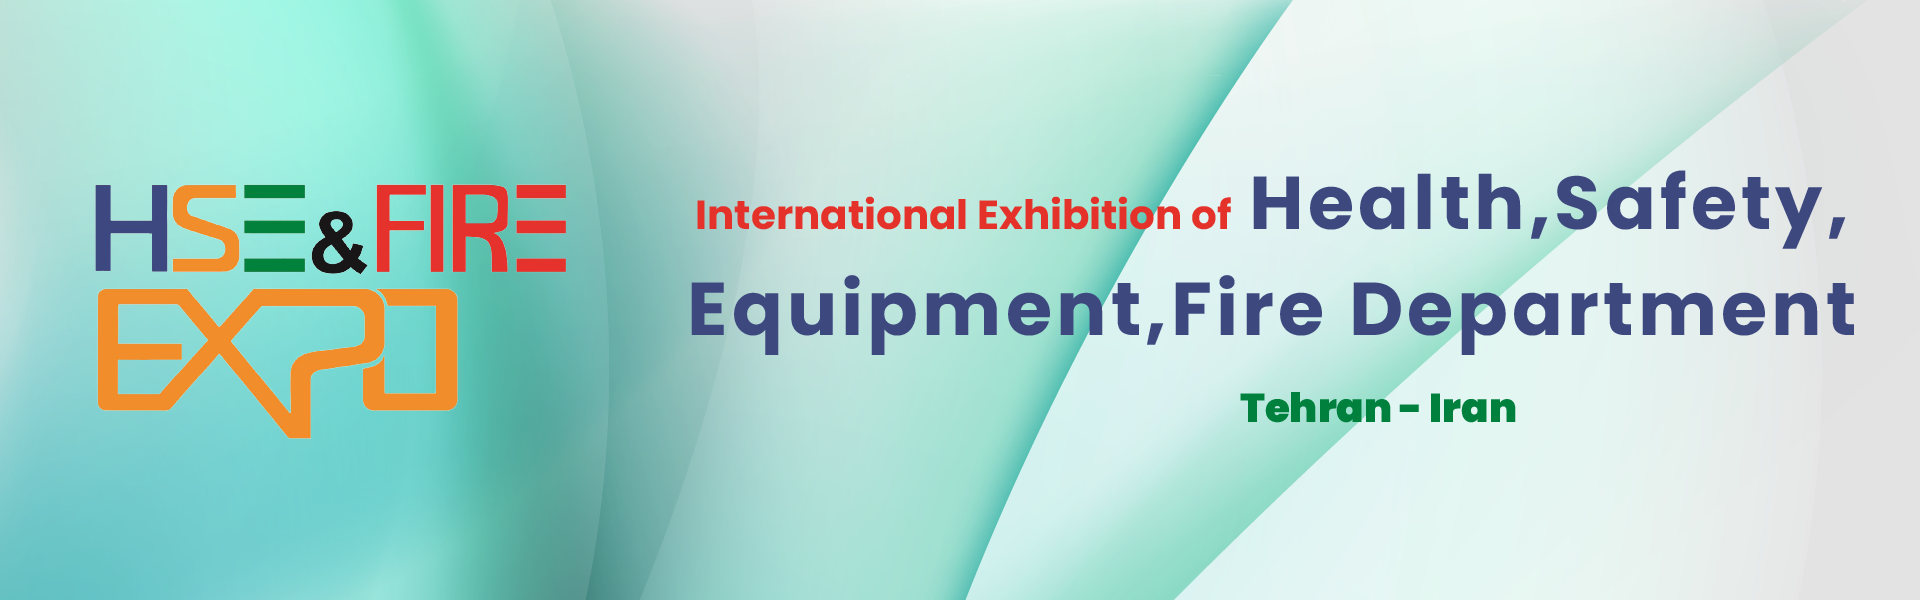 Equipment for Health and Rescue Technologies Exhibition Iran